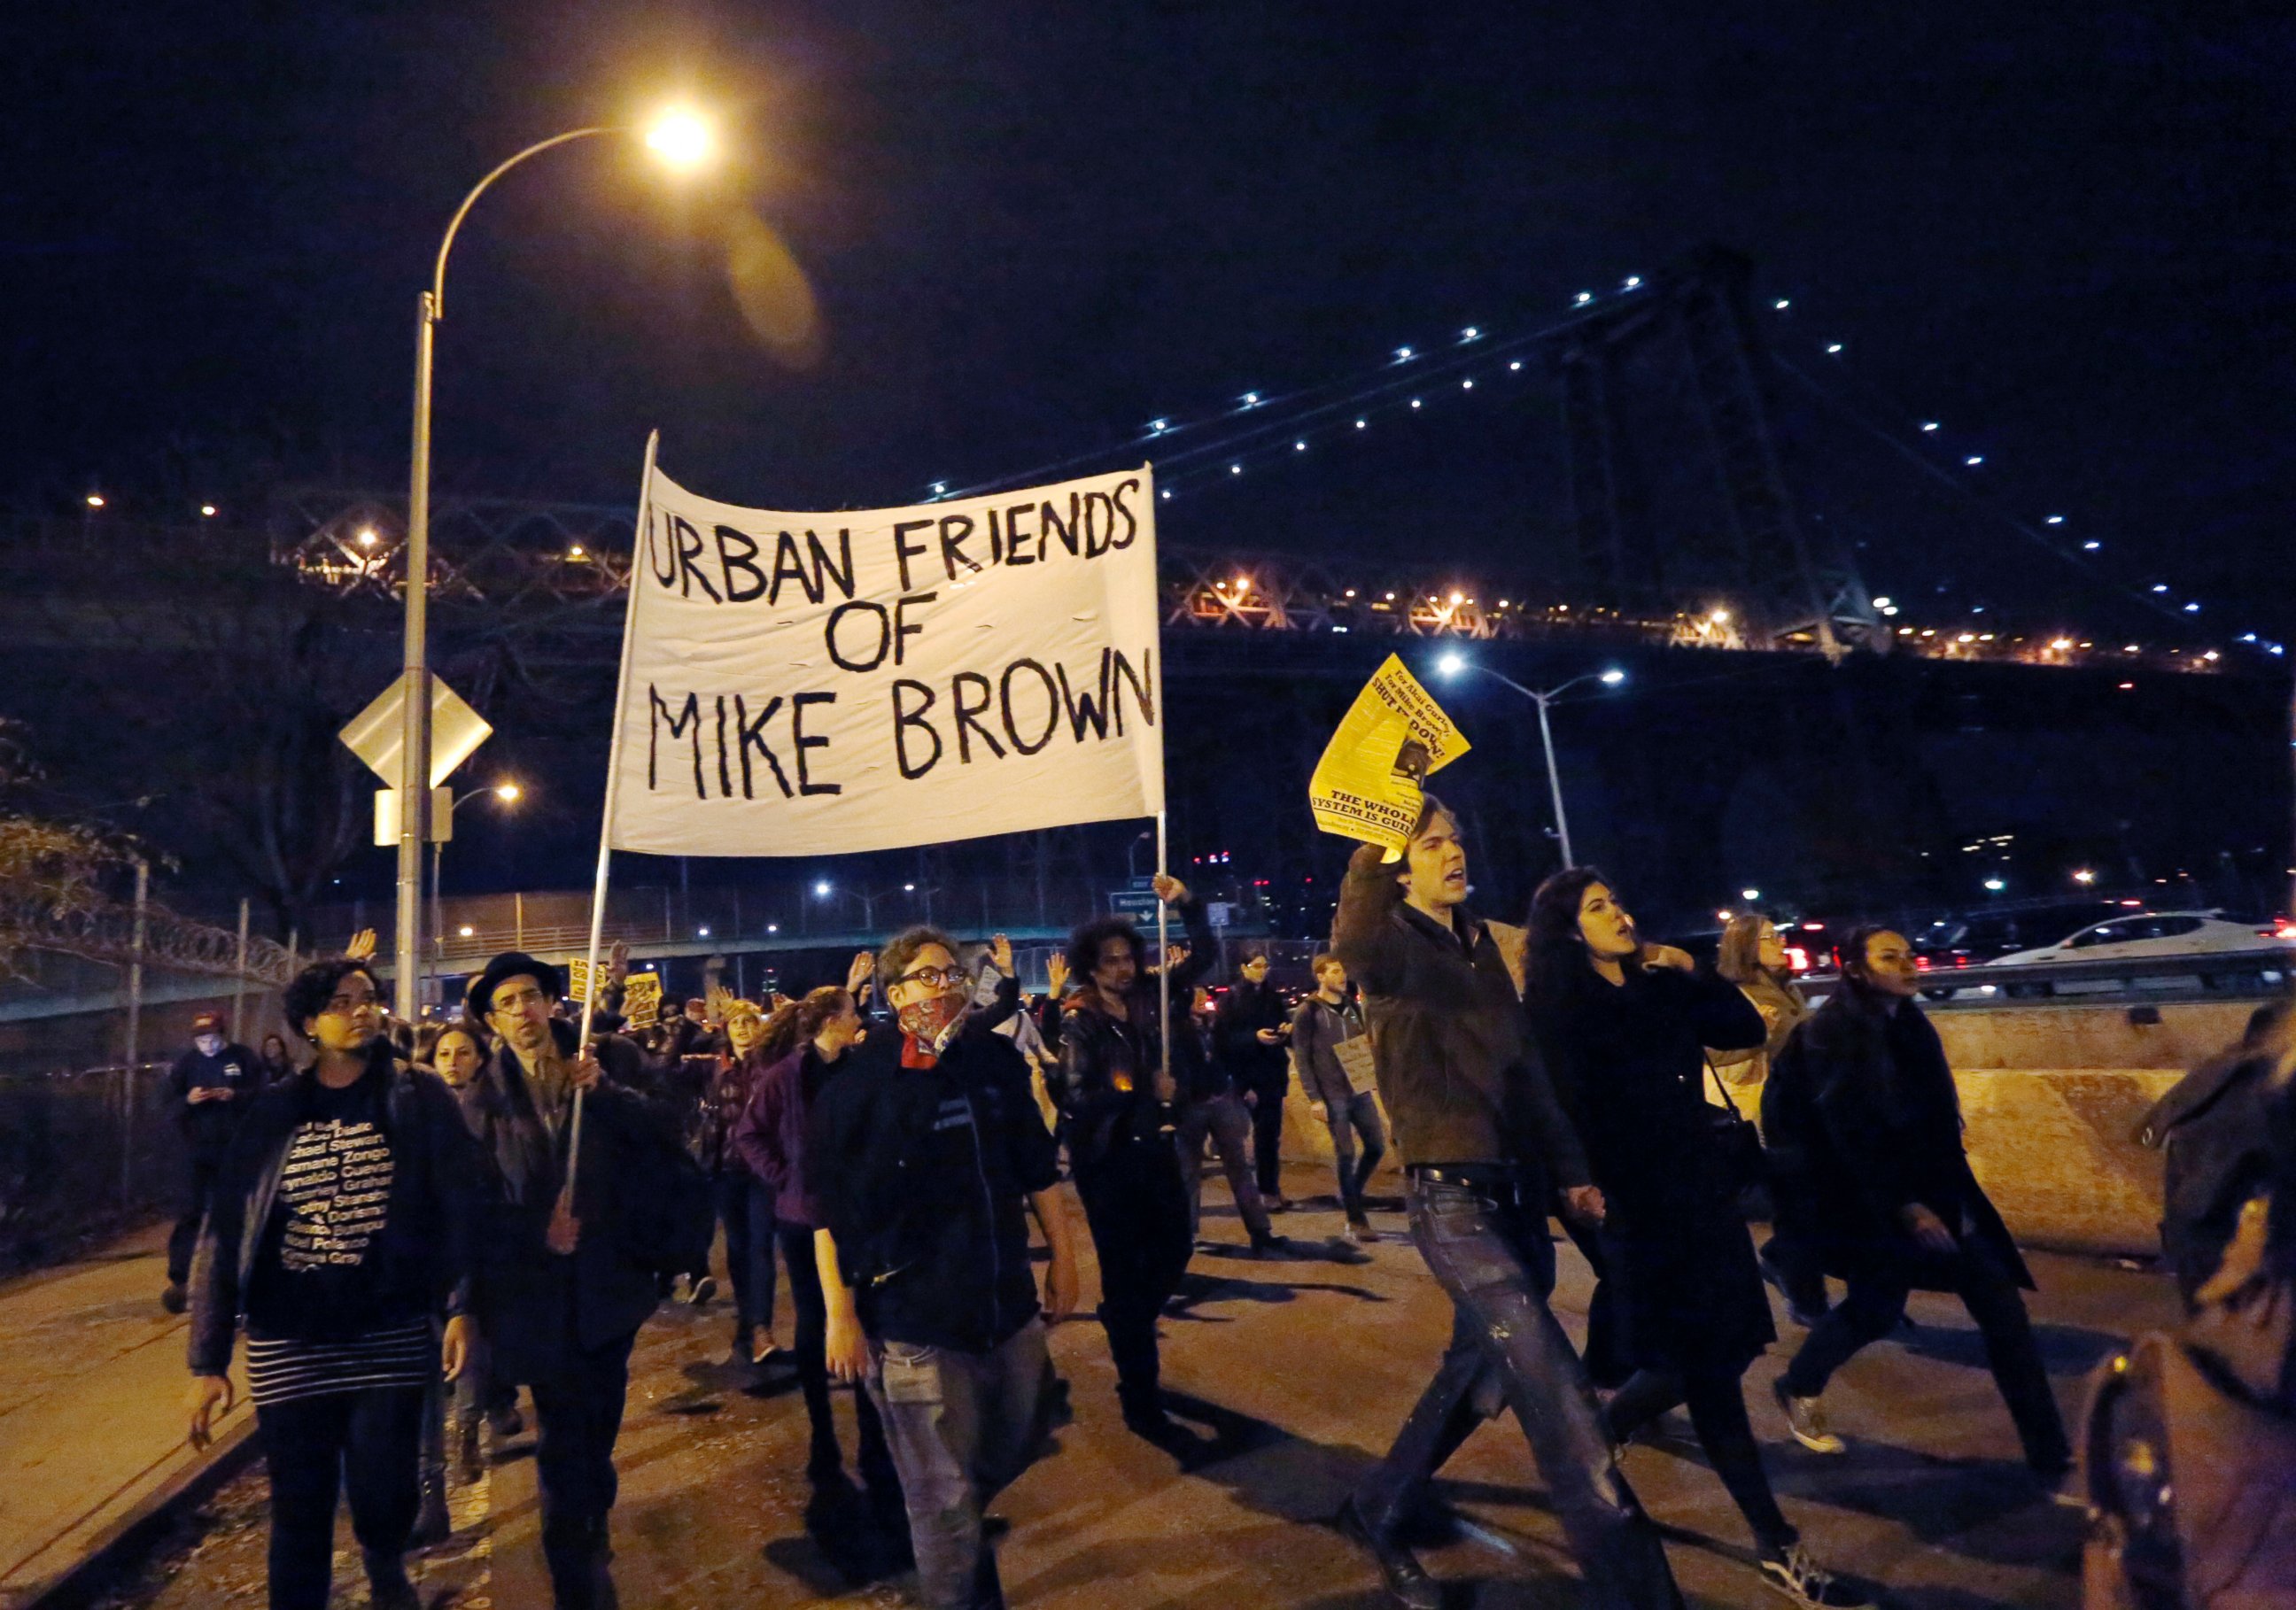 PHOTO: Protesters walk on the FDR Drive during a march in support of the people of Ferguson on the second night of protests after a Missouri grand jury refused to indict police officer Darren Wilson for shooting Michael Brown, in New York, Nov. 25, 2014.